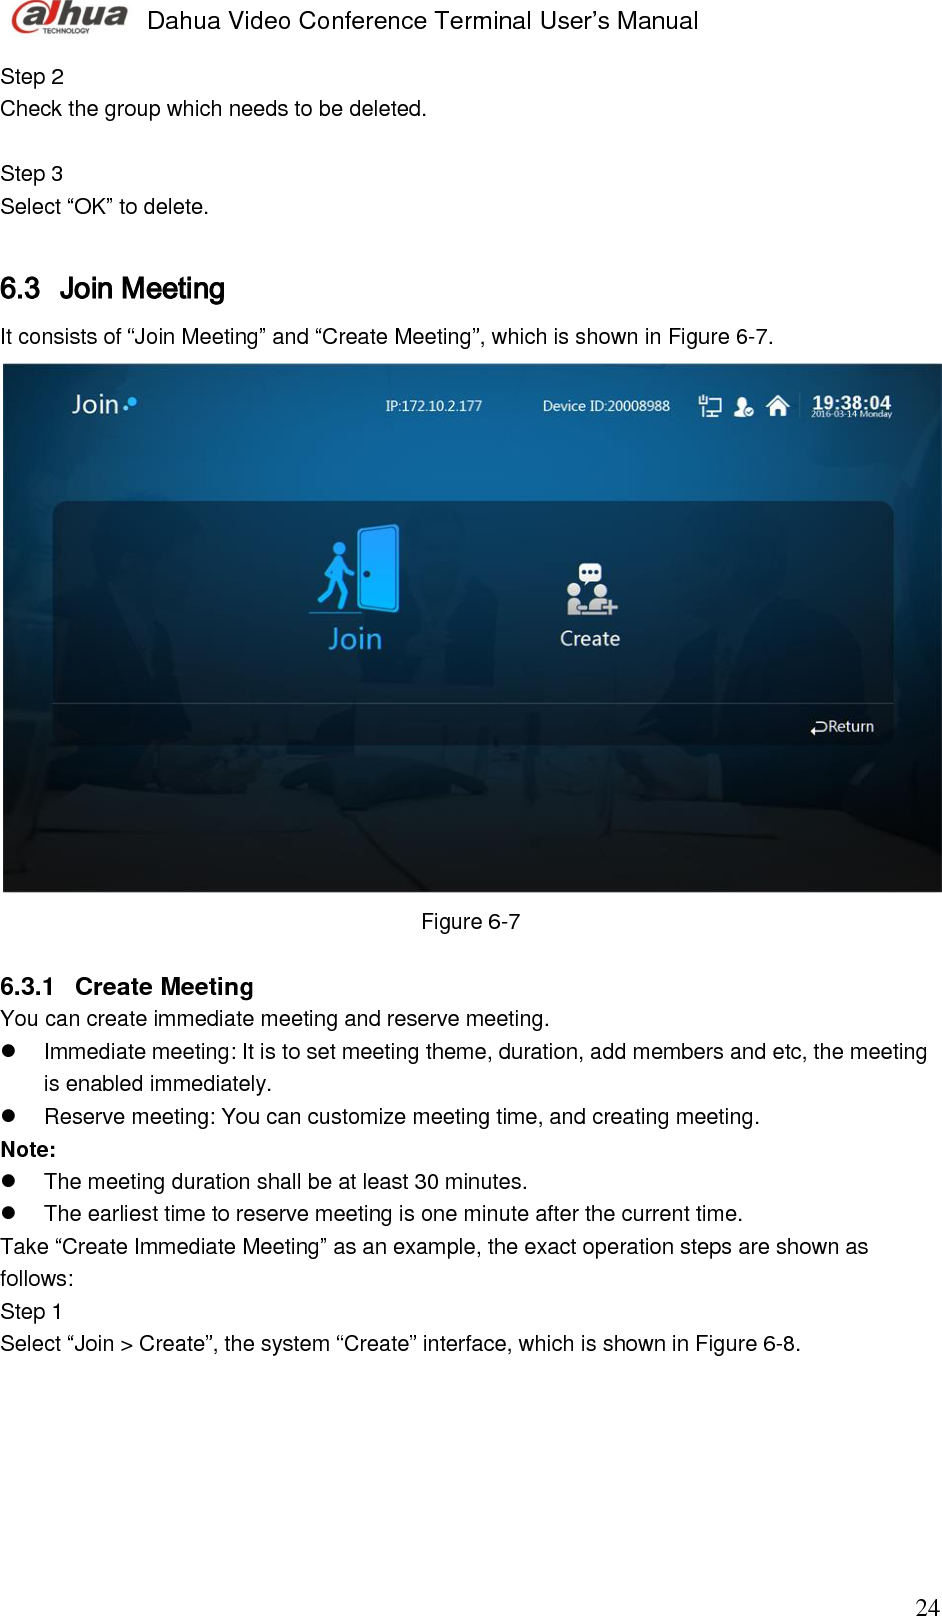  Dahua Video Conference Terminal User’s Manual                                                                              24 Step 2  Check the group which needs to be deleted.   Step 3  Select “OK” to delete.   6.3 Join Meeting  It consists of “Join Meeting” and “Create Meeting”, which is shown in Figure 6-7.   Figure 6-7  6.3.1  Create Meeting  You can create immediate meeting and reserve meeting.    Immediate meeting: It is to set meeting theme, duration, add members and etc, the meeting is enabled immediately.   Reserve meeting: You can customize meeting time, and creating meeting.  Note:    The meeting duration shall be at least 30 minutes.    The earliest time to reserve meeting is one minute after the current time. Take “Create Immediate Meeting” as an example, the exact operation steps are shown as follows:  Step 1  Select “Join &gt; Create”, the system “Create” interface, which is shown in Figure 6-8.  